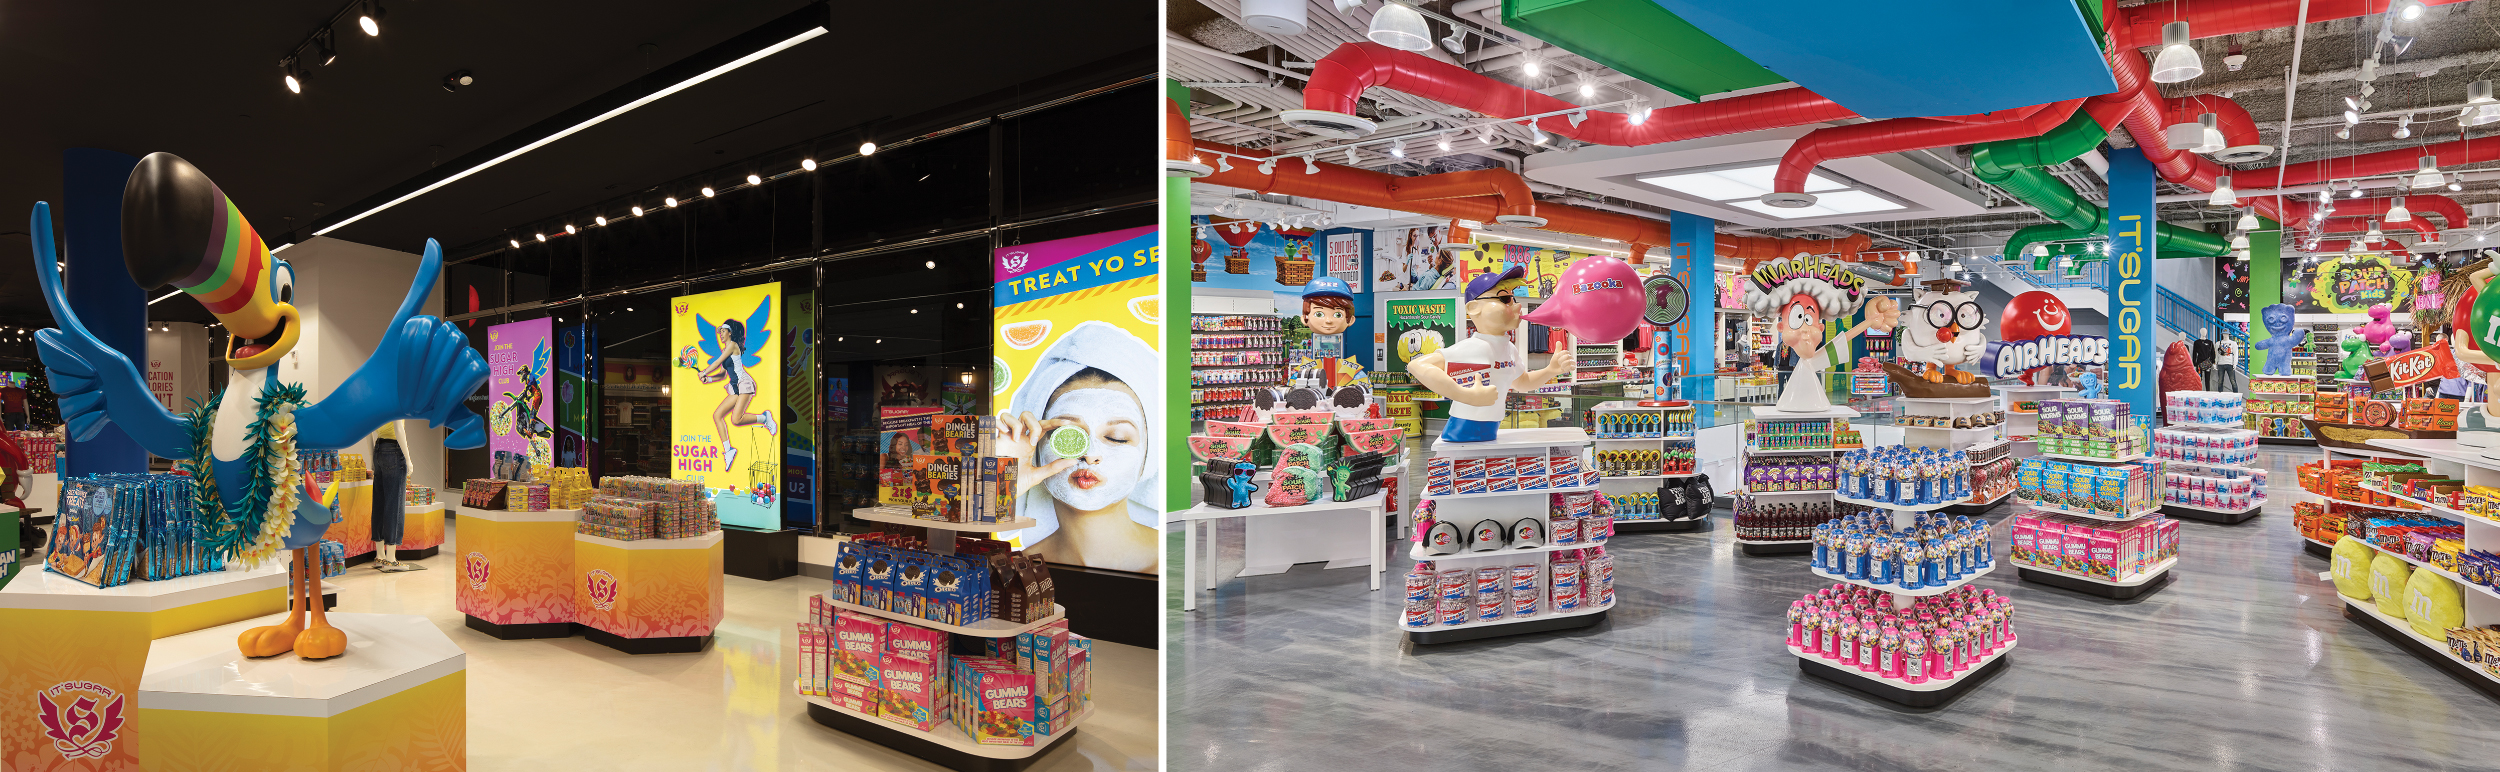 The American Dream IT’SUGAR location in East Rutherford, N.J., aims to immerse customers through oversized props and tantilizing candy displays. 📷: Frank Oudeman